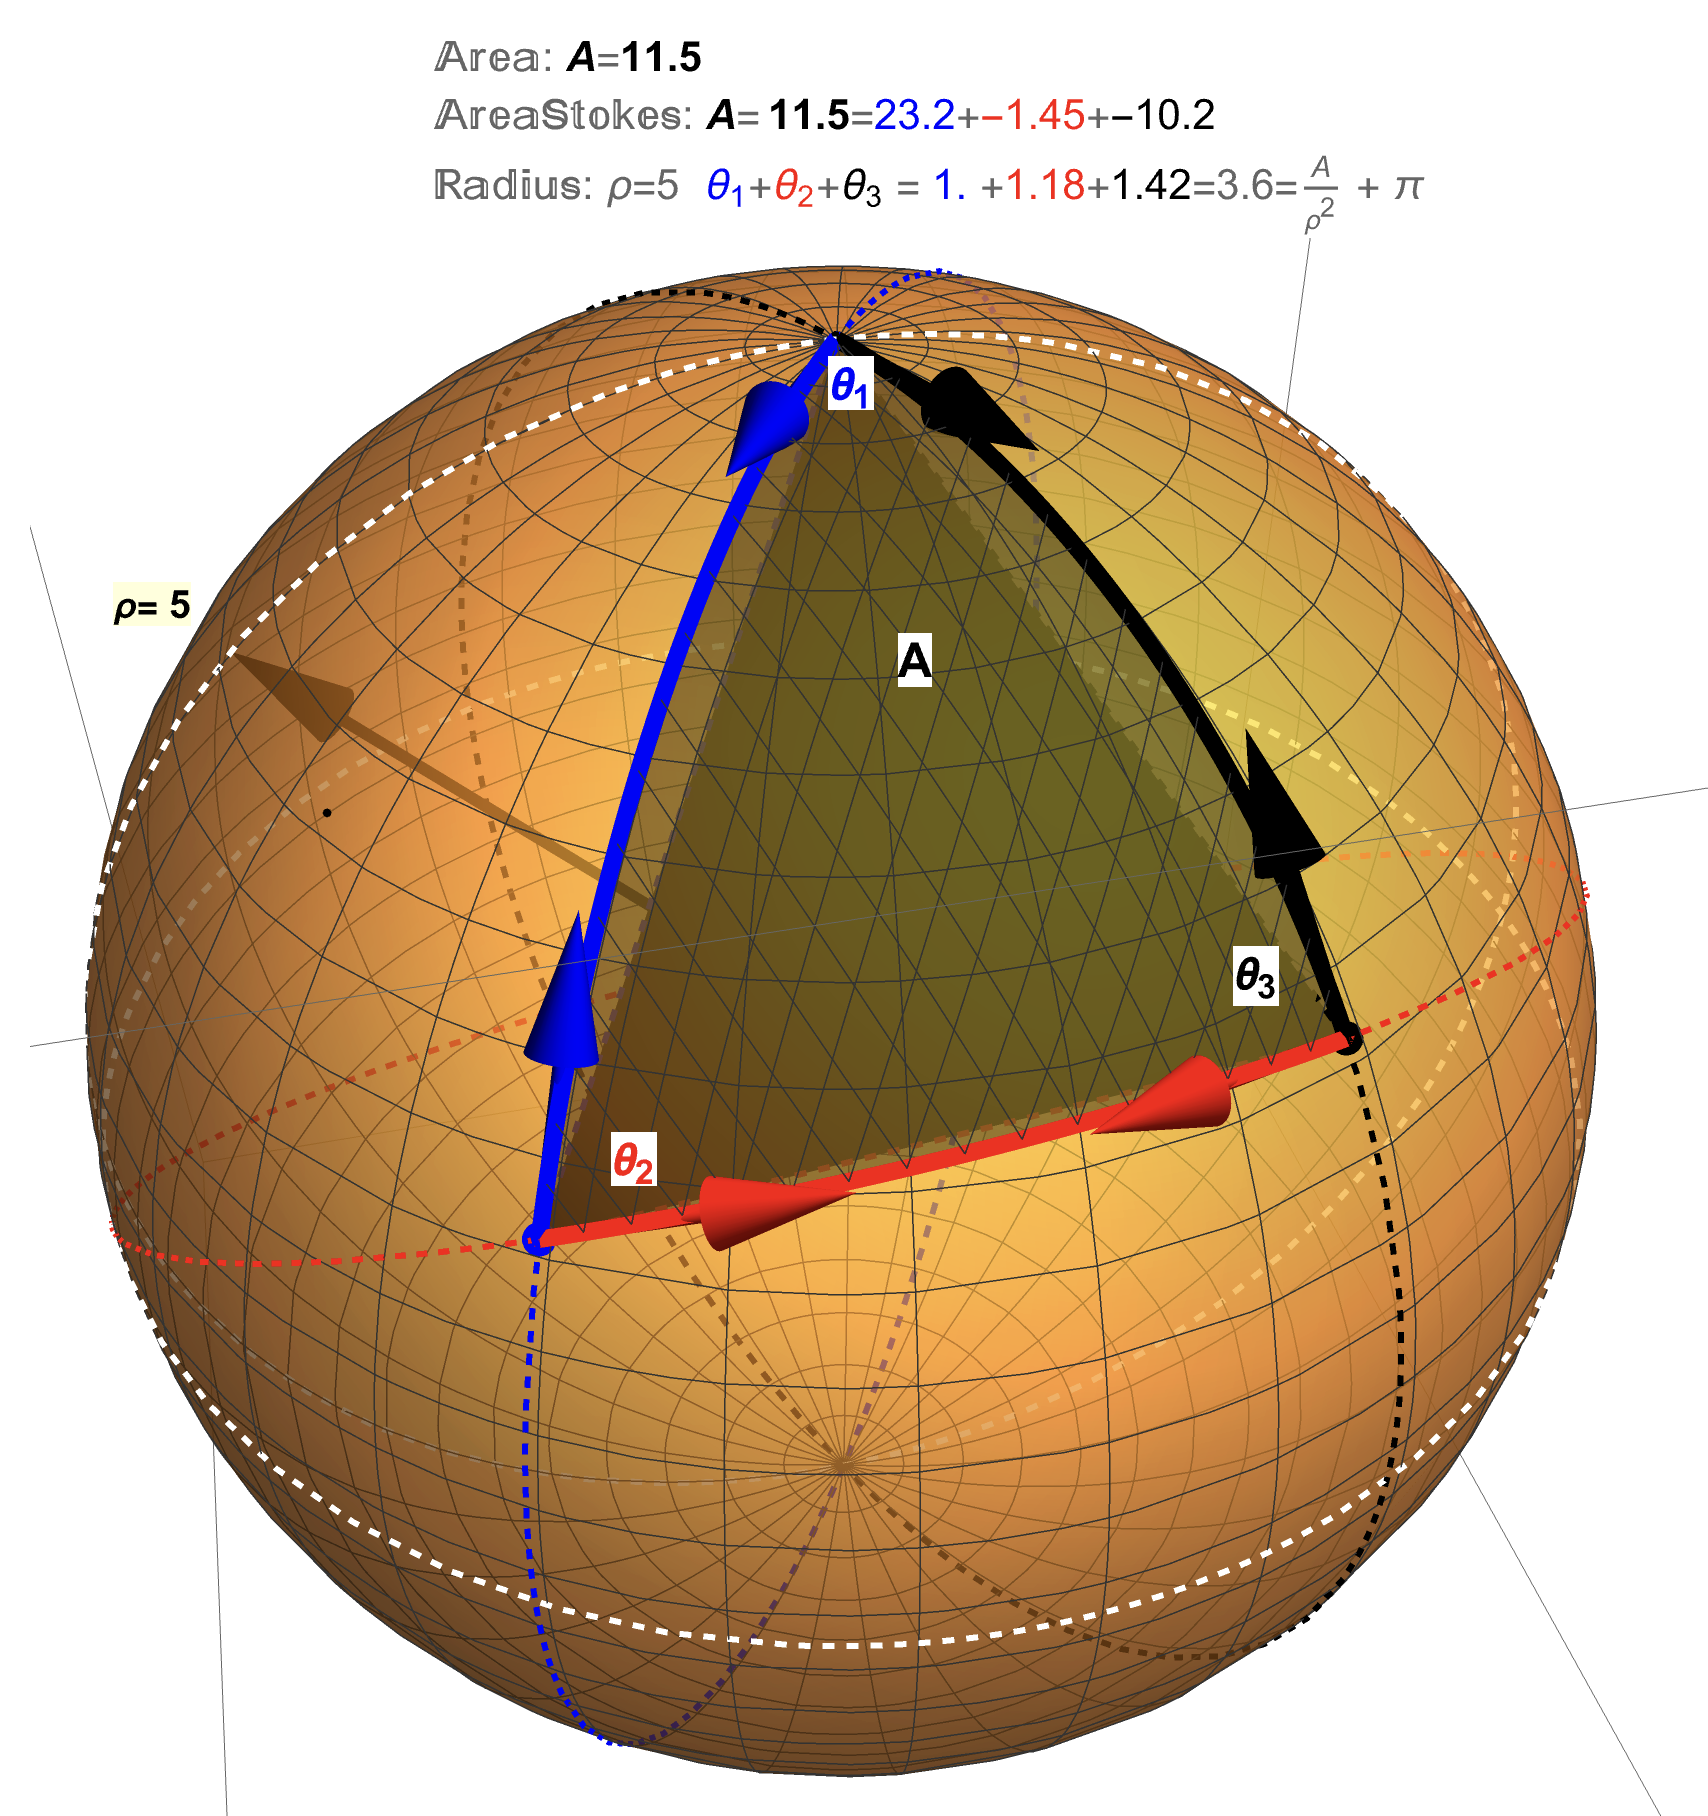 A Geodesic Triangle: The measure of the angles of this triangle (for example, \(\theta_{1}\)) can be found from the (tangent) vectors to the edges of the triangle (say, \(v_{1}\) and \(w_{1}\)) using the formula \(\theta_{1}=\mbox{arccos}\left(\frac{v_{1}\cdot w_{1}}{|v_{1}||w_{1}|}\right)\). The area of the geodesic triangle can be determined in a couple of ways (Stokes’s Theorem and Surface Area Integral) and will be discussed shortly.